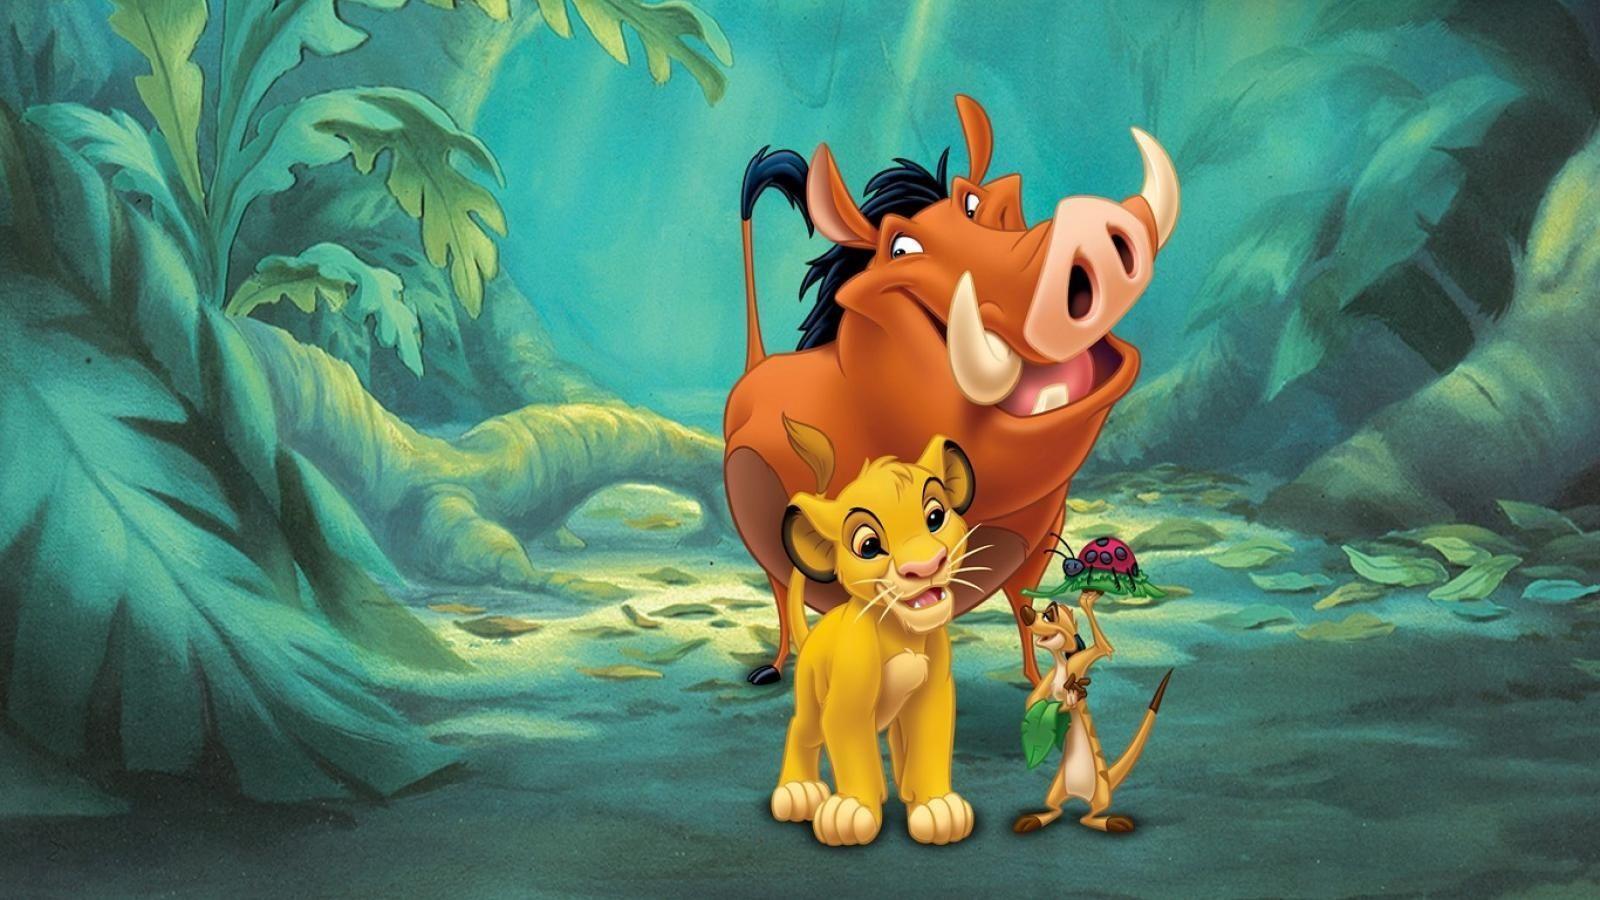 The Lion King Wallpapers - Wallpaper Cave